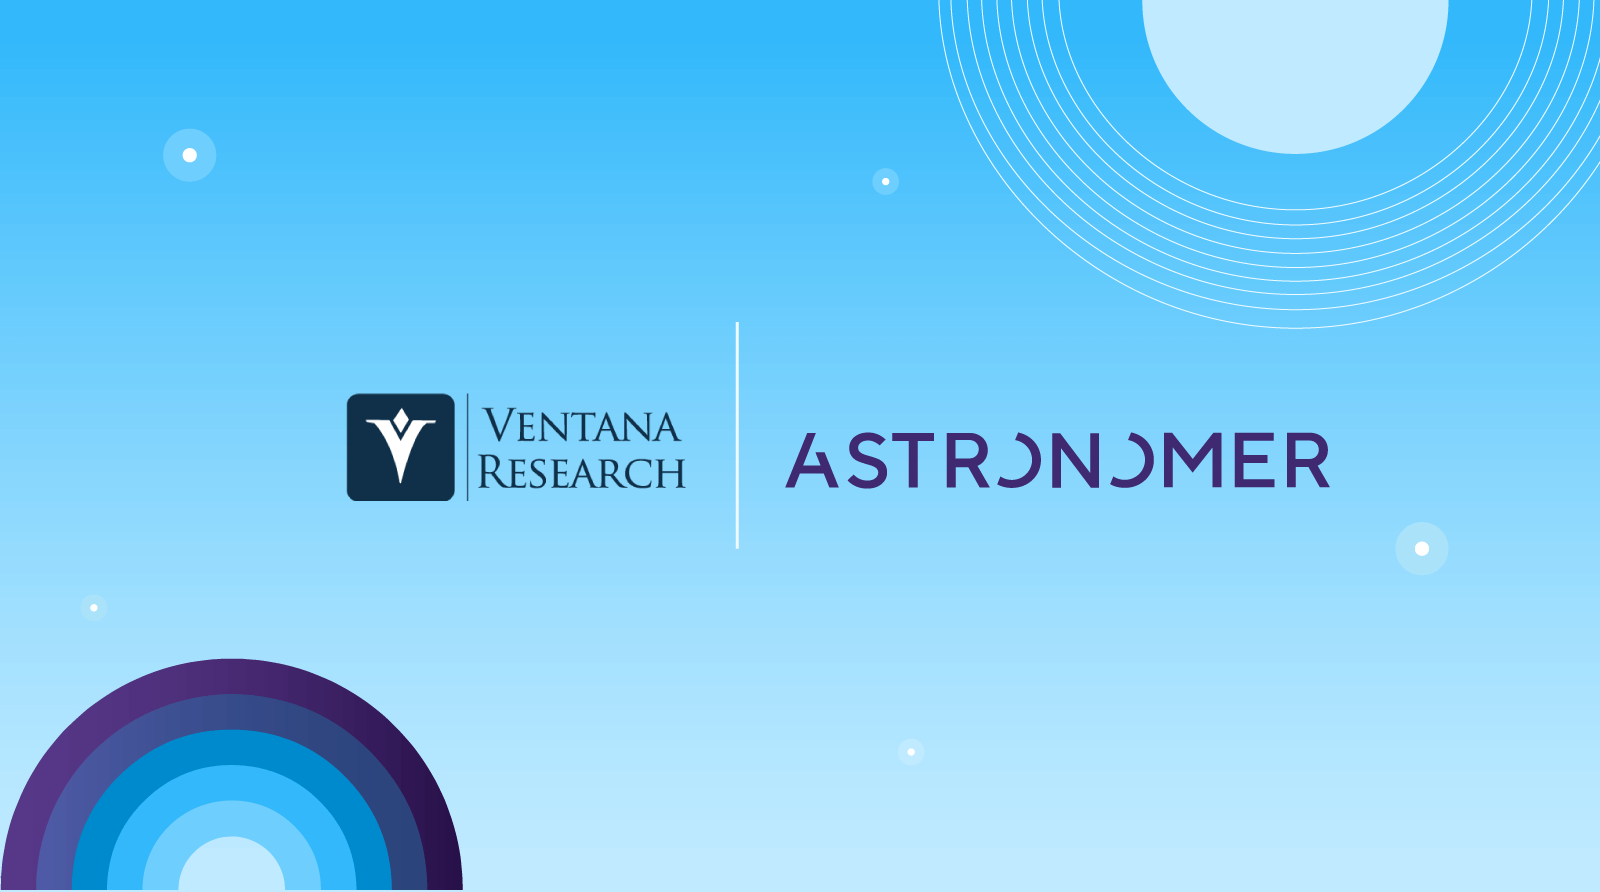 Ventana Research Names Astronomer as a Finalist for Its Digital Innovation Awards